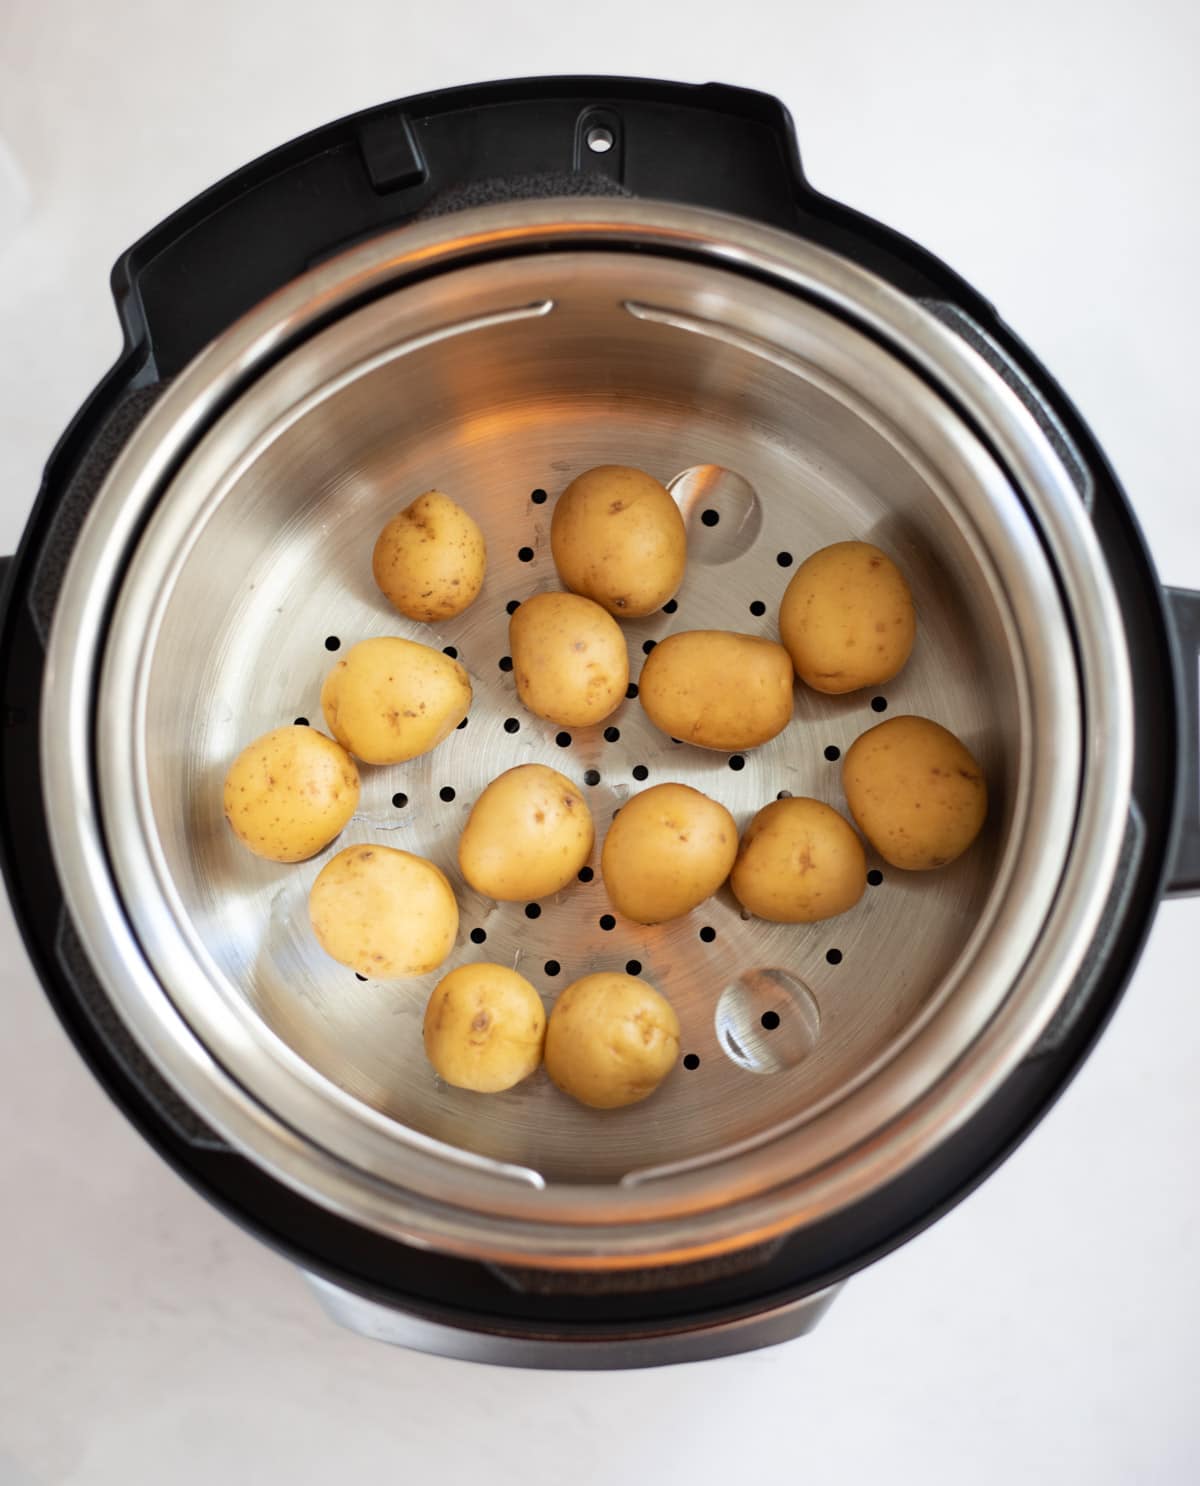 steam baby potatoes in instant pot